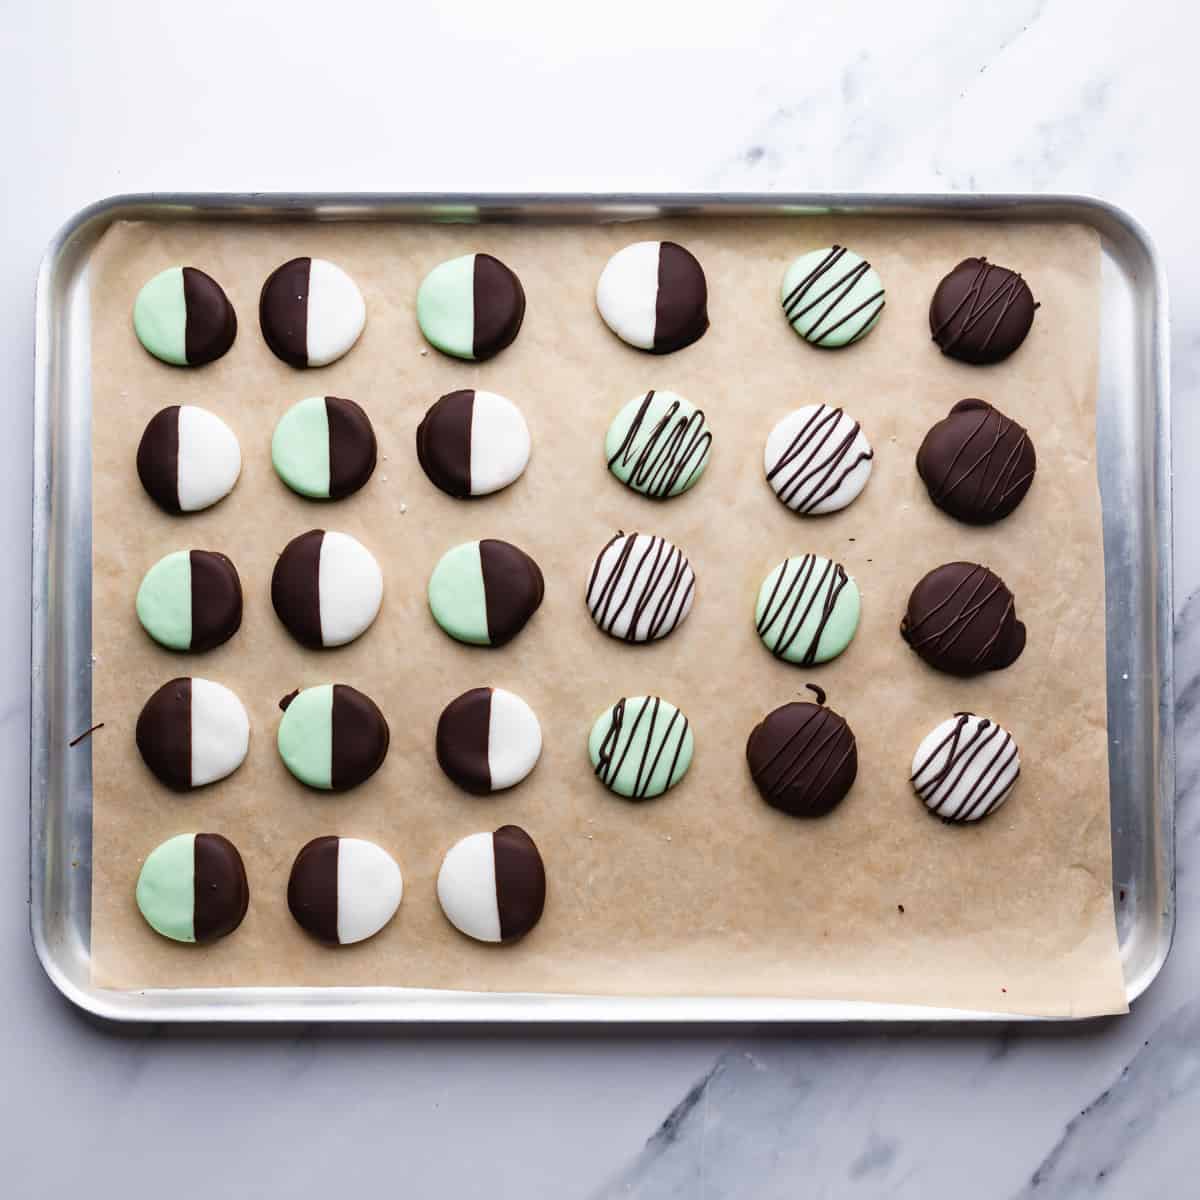 discs of mint creams dipped and drizzled with chocolate on a silver metal tray lined with brown baking paper.